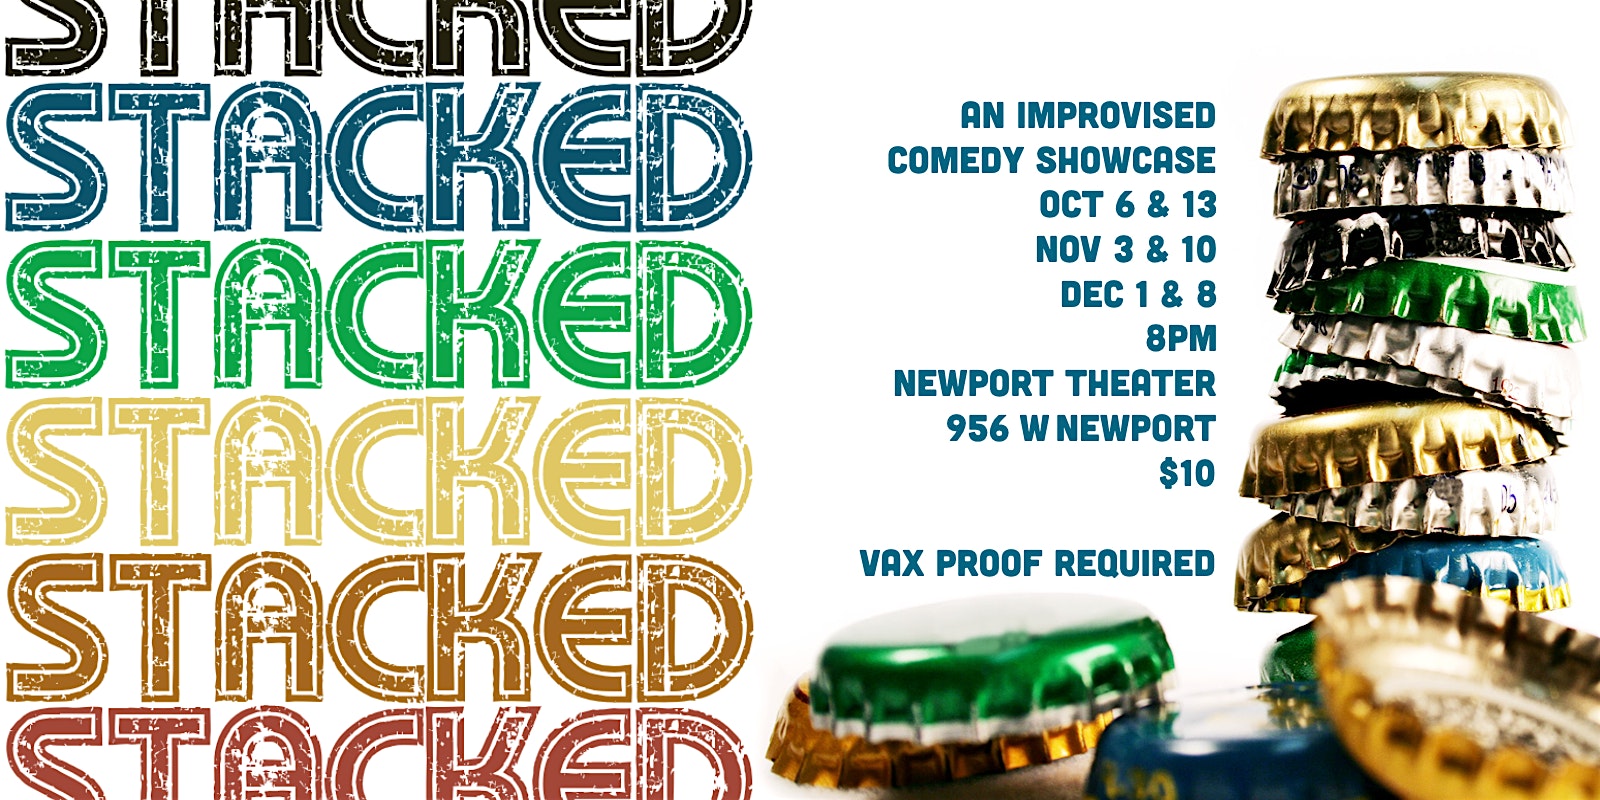 STACKED Comedy Showcase